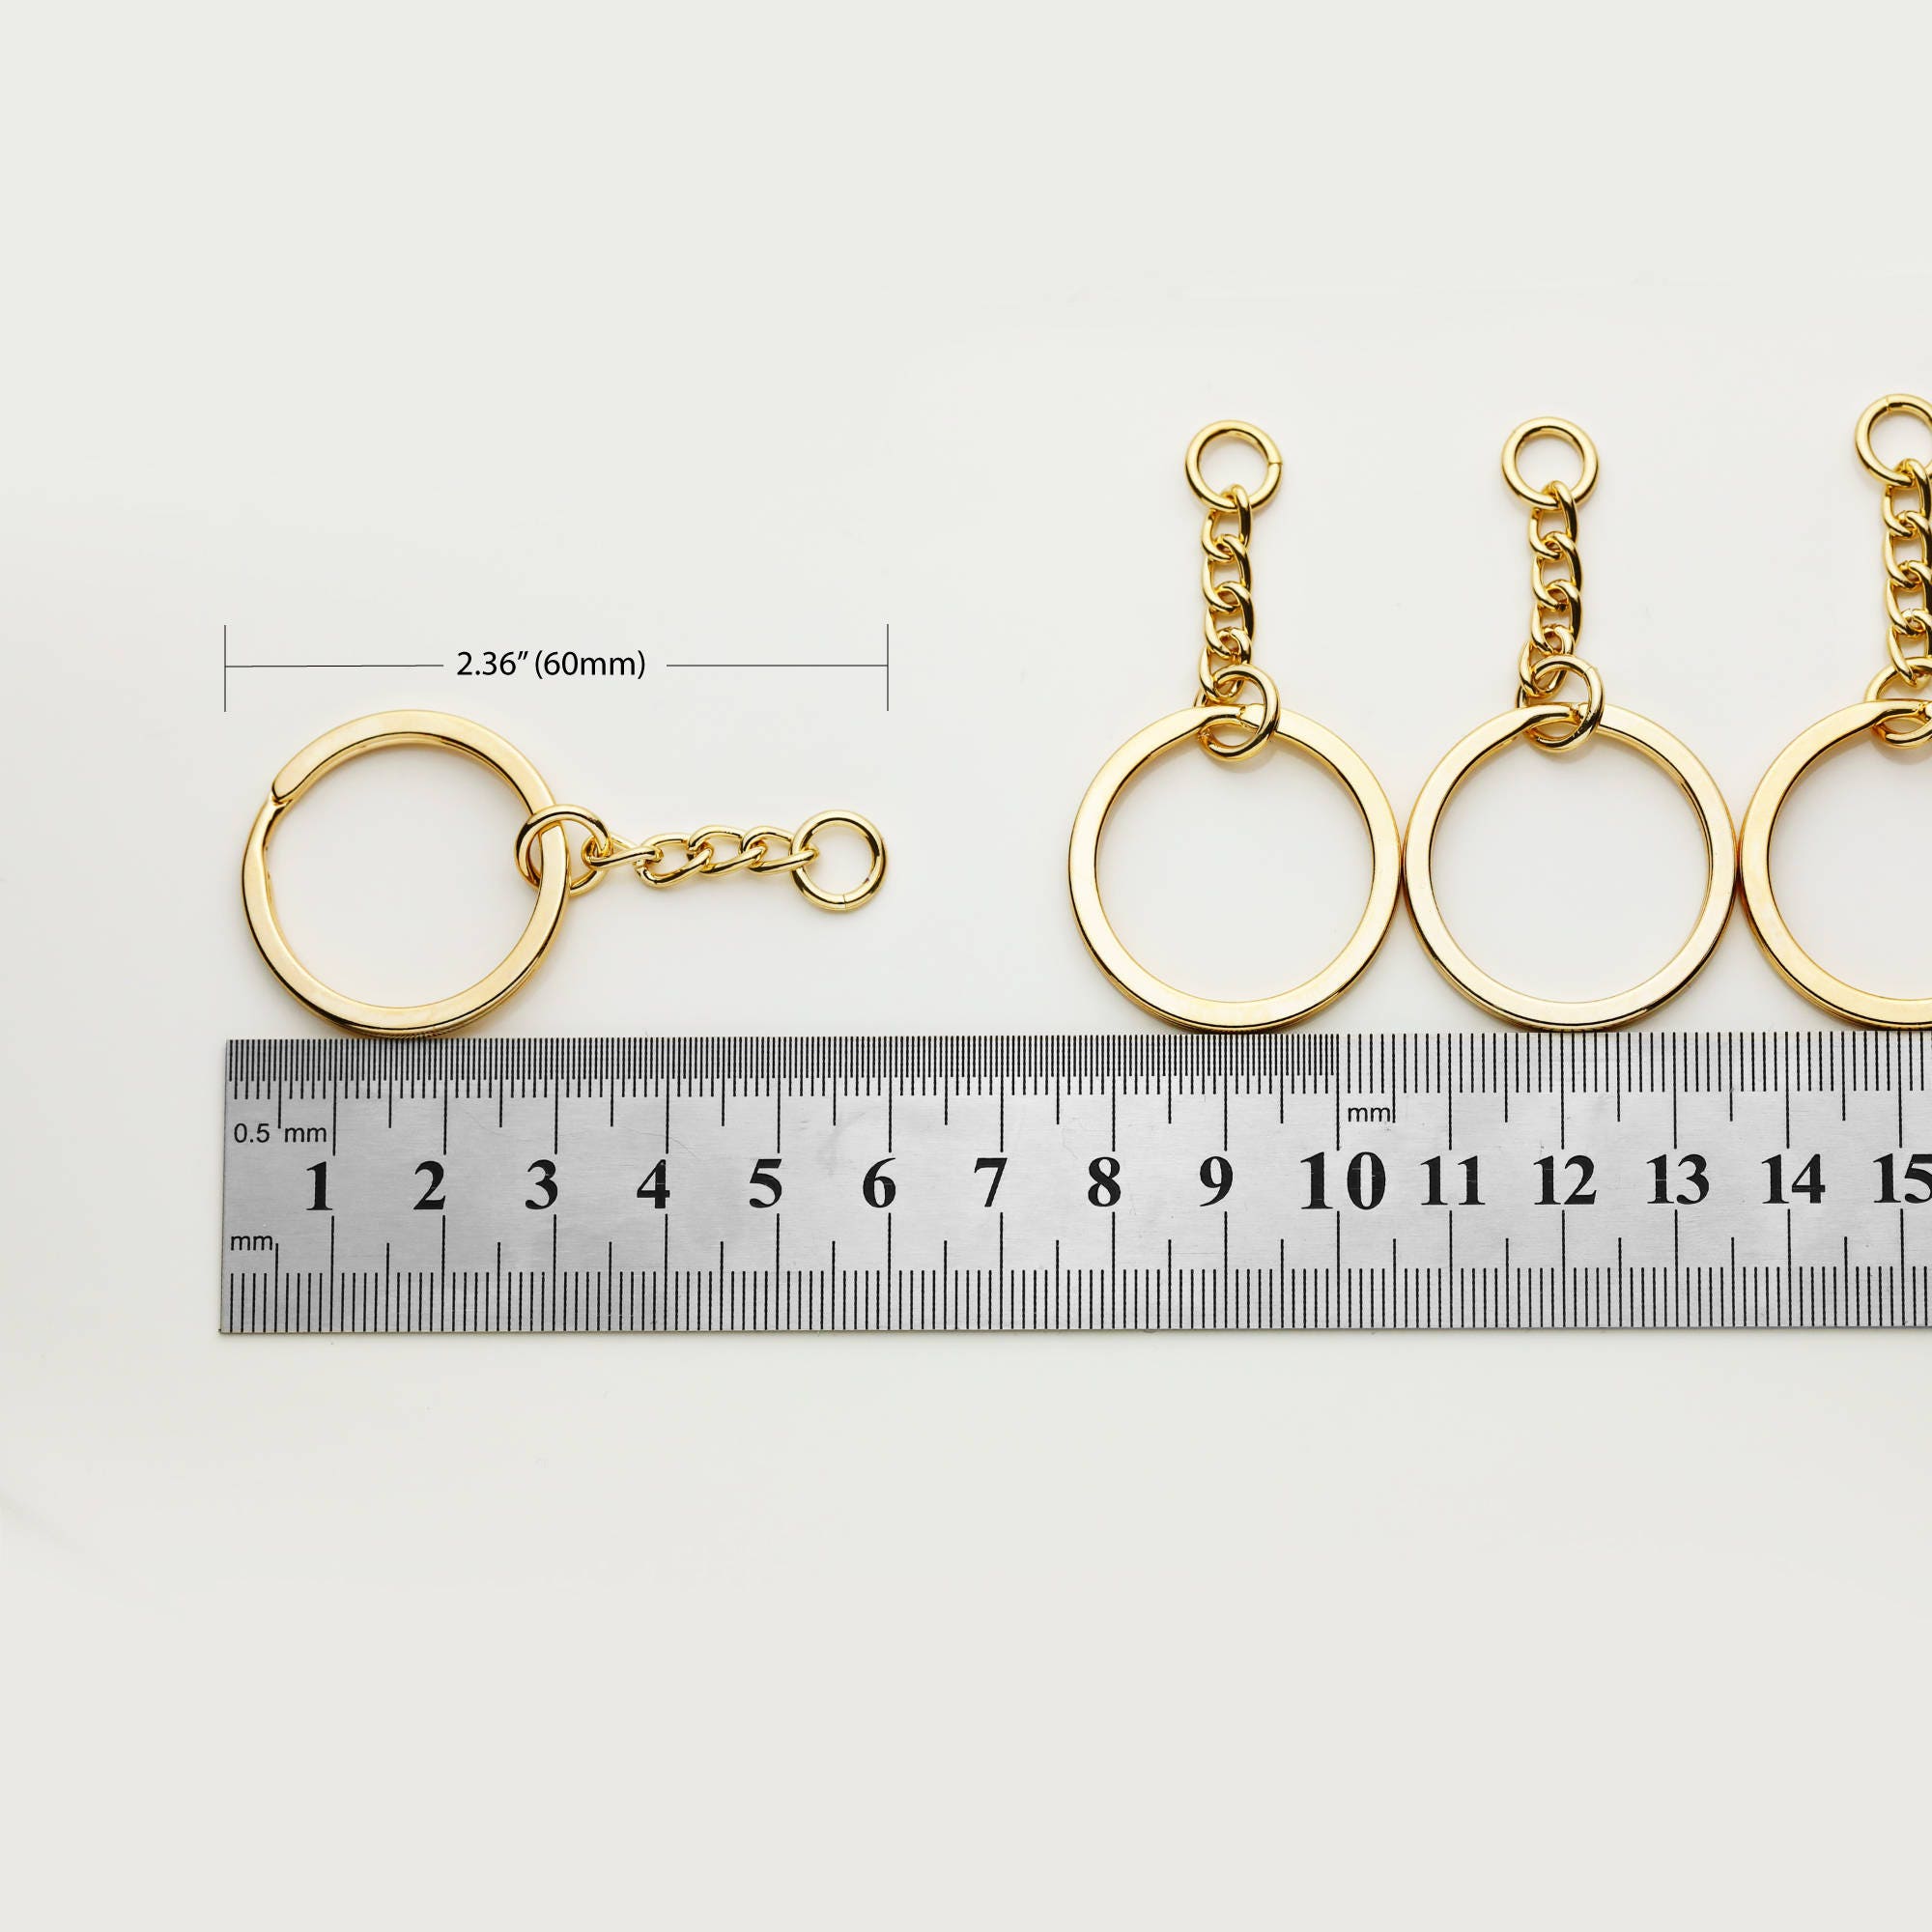 Gold-plated key-chains